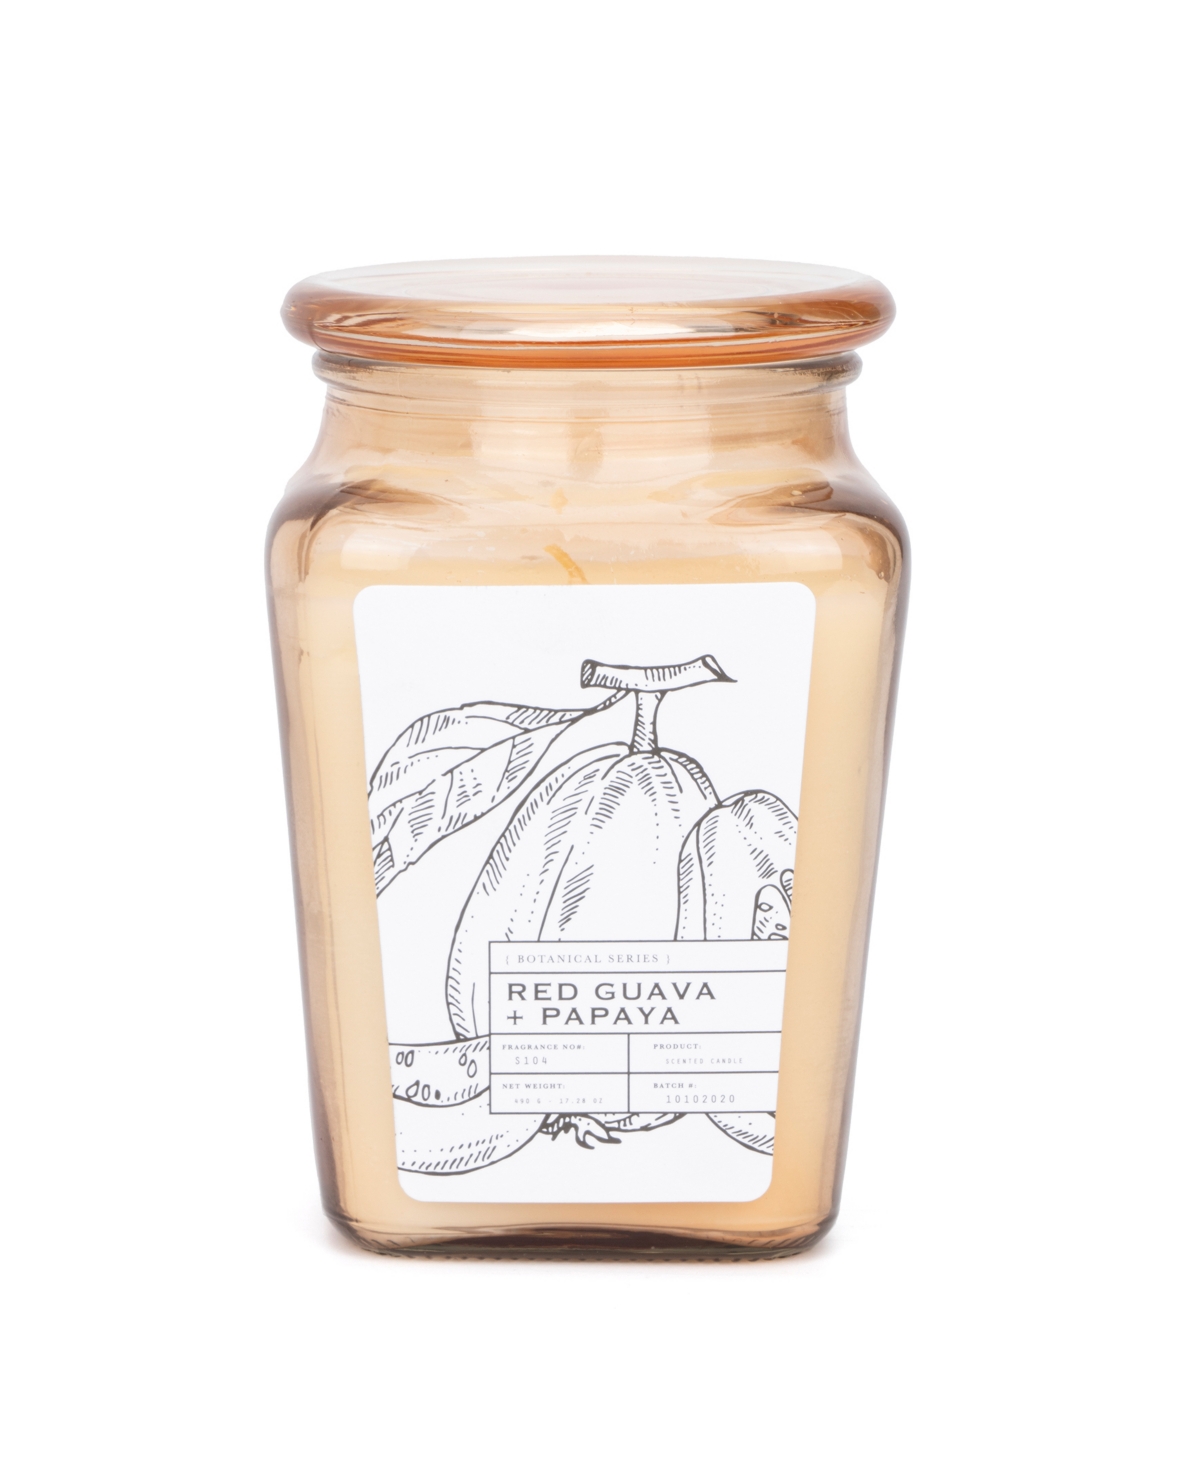 Hybrid & Company Long Lasting Highly Natural Soy Blend Red Guava-papaya Scented Jar Candle In Peach